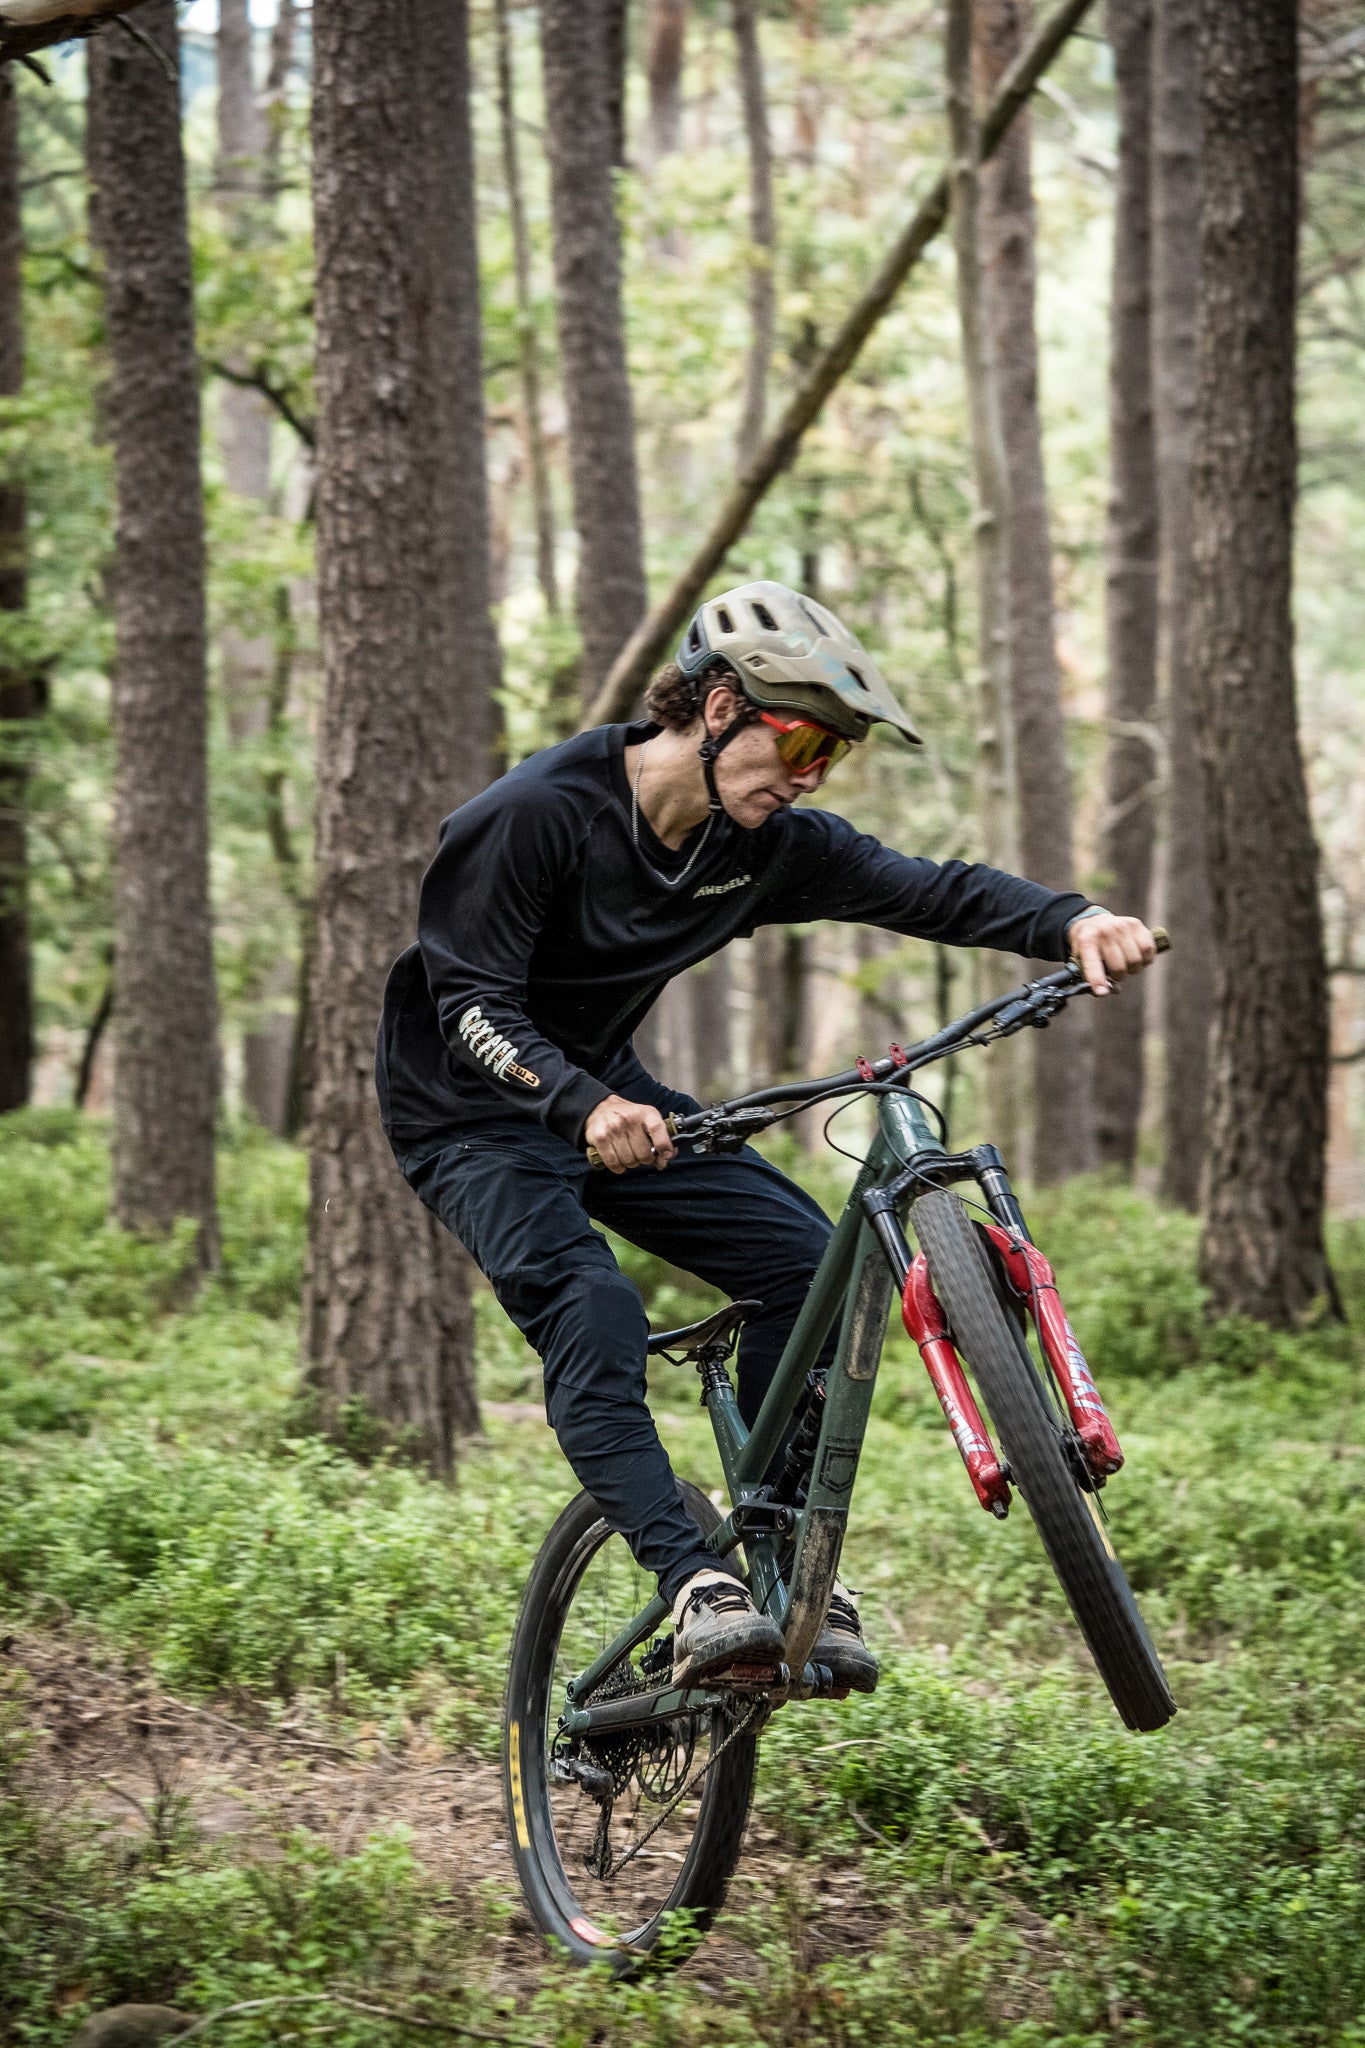 Skwerel® breathable heavy duty MTB trail sleeve “Popsicle Coil” in an oversized fit